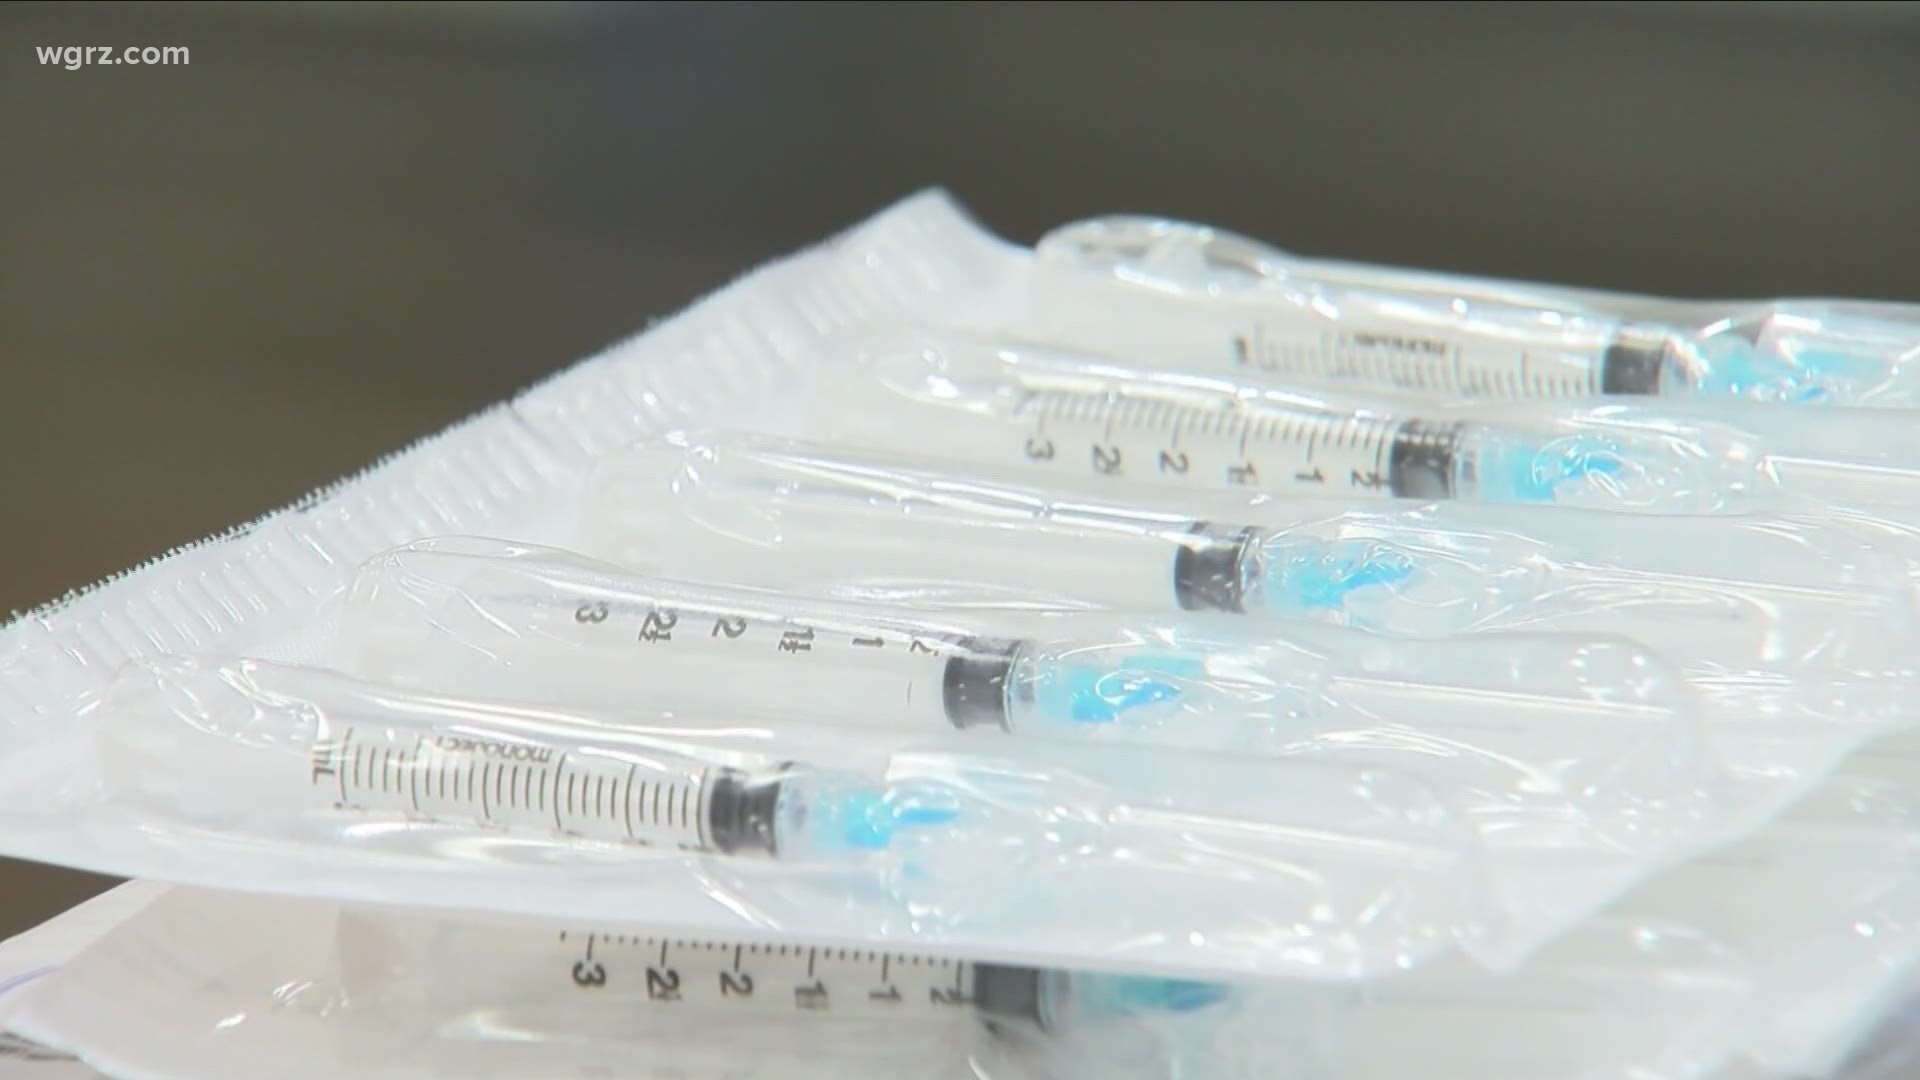 Vaccine eligibility expands to 50+ starting Tuesday